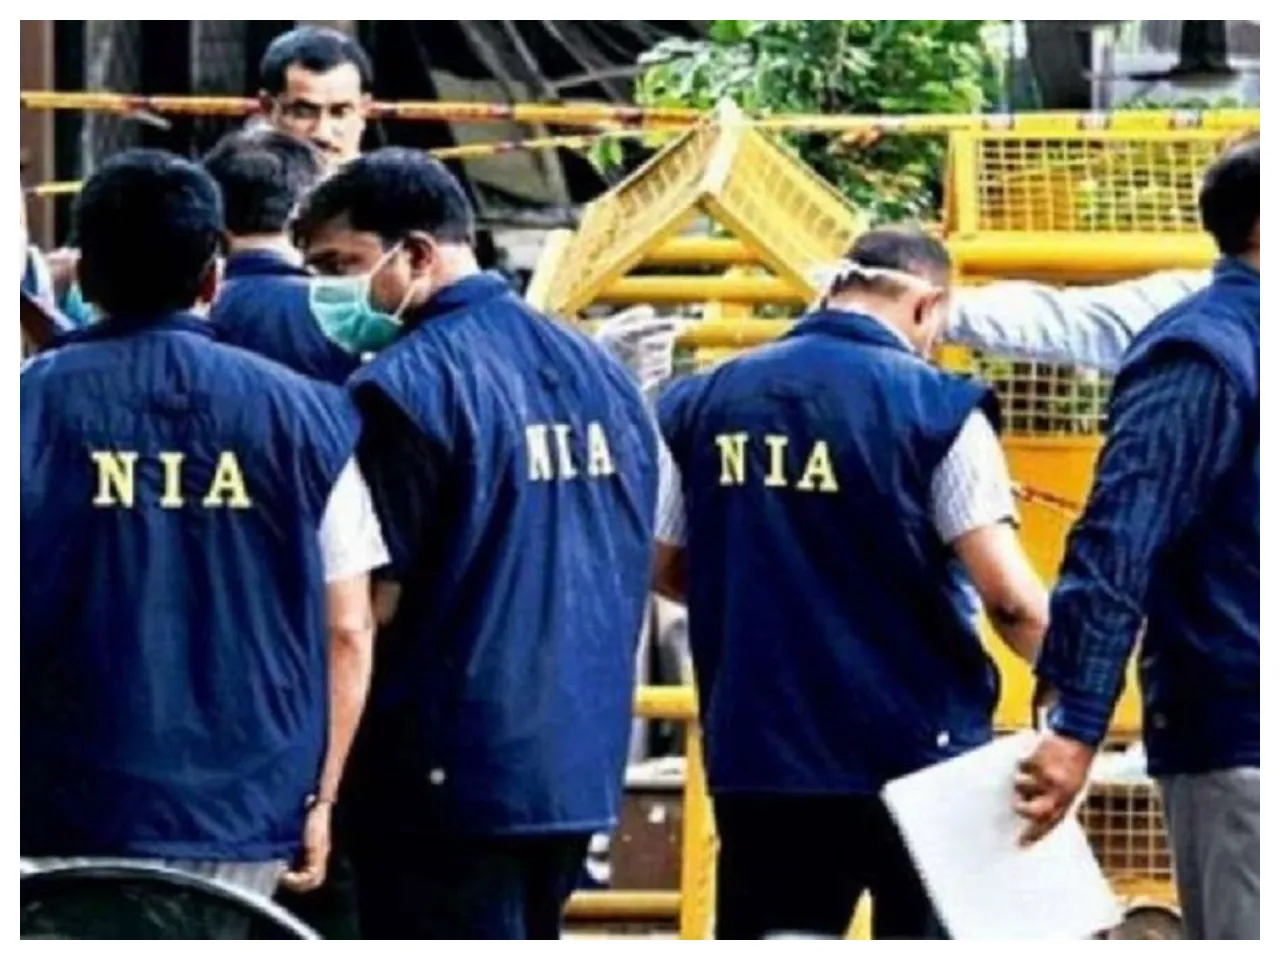 NIA launches searches at 100 locations